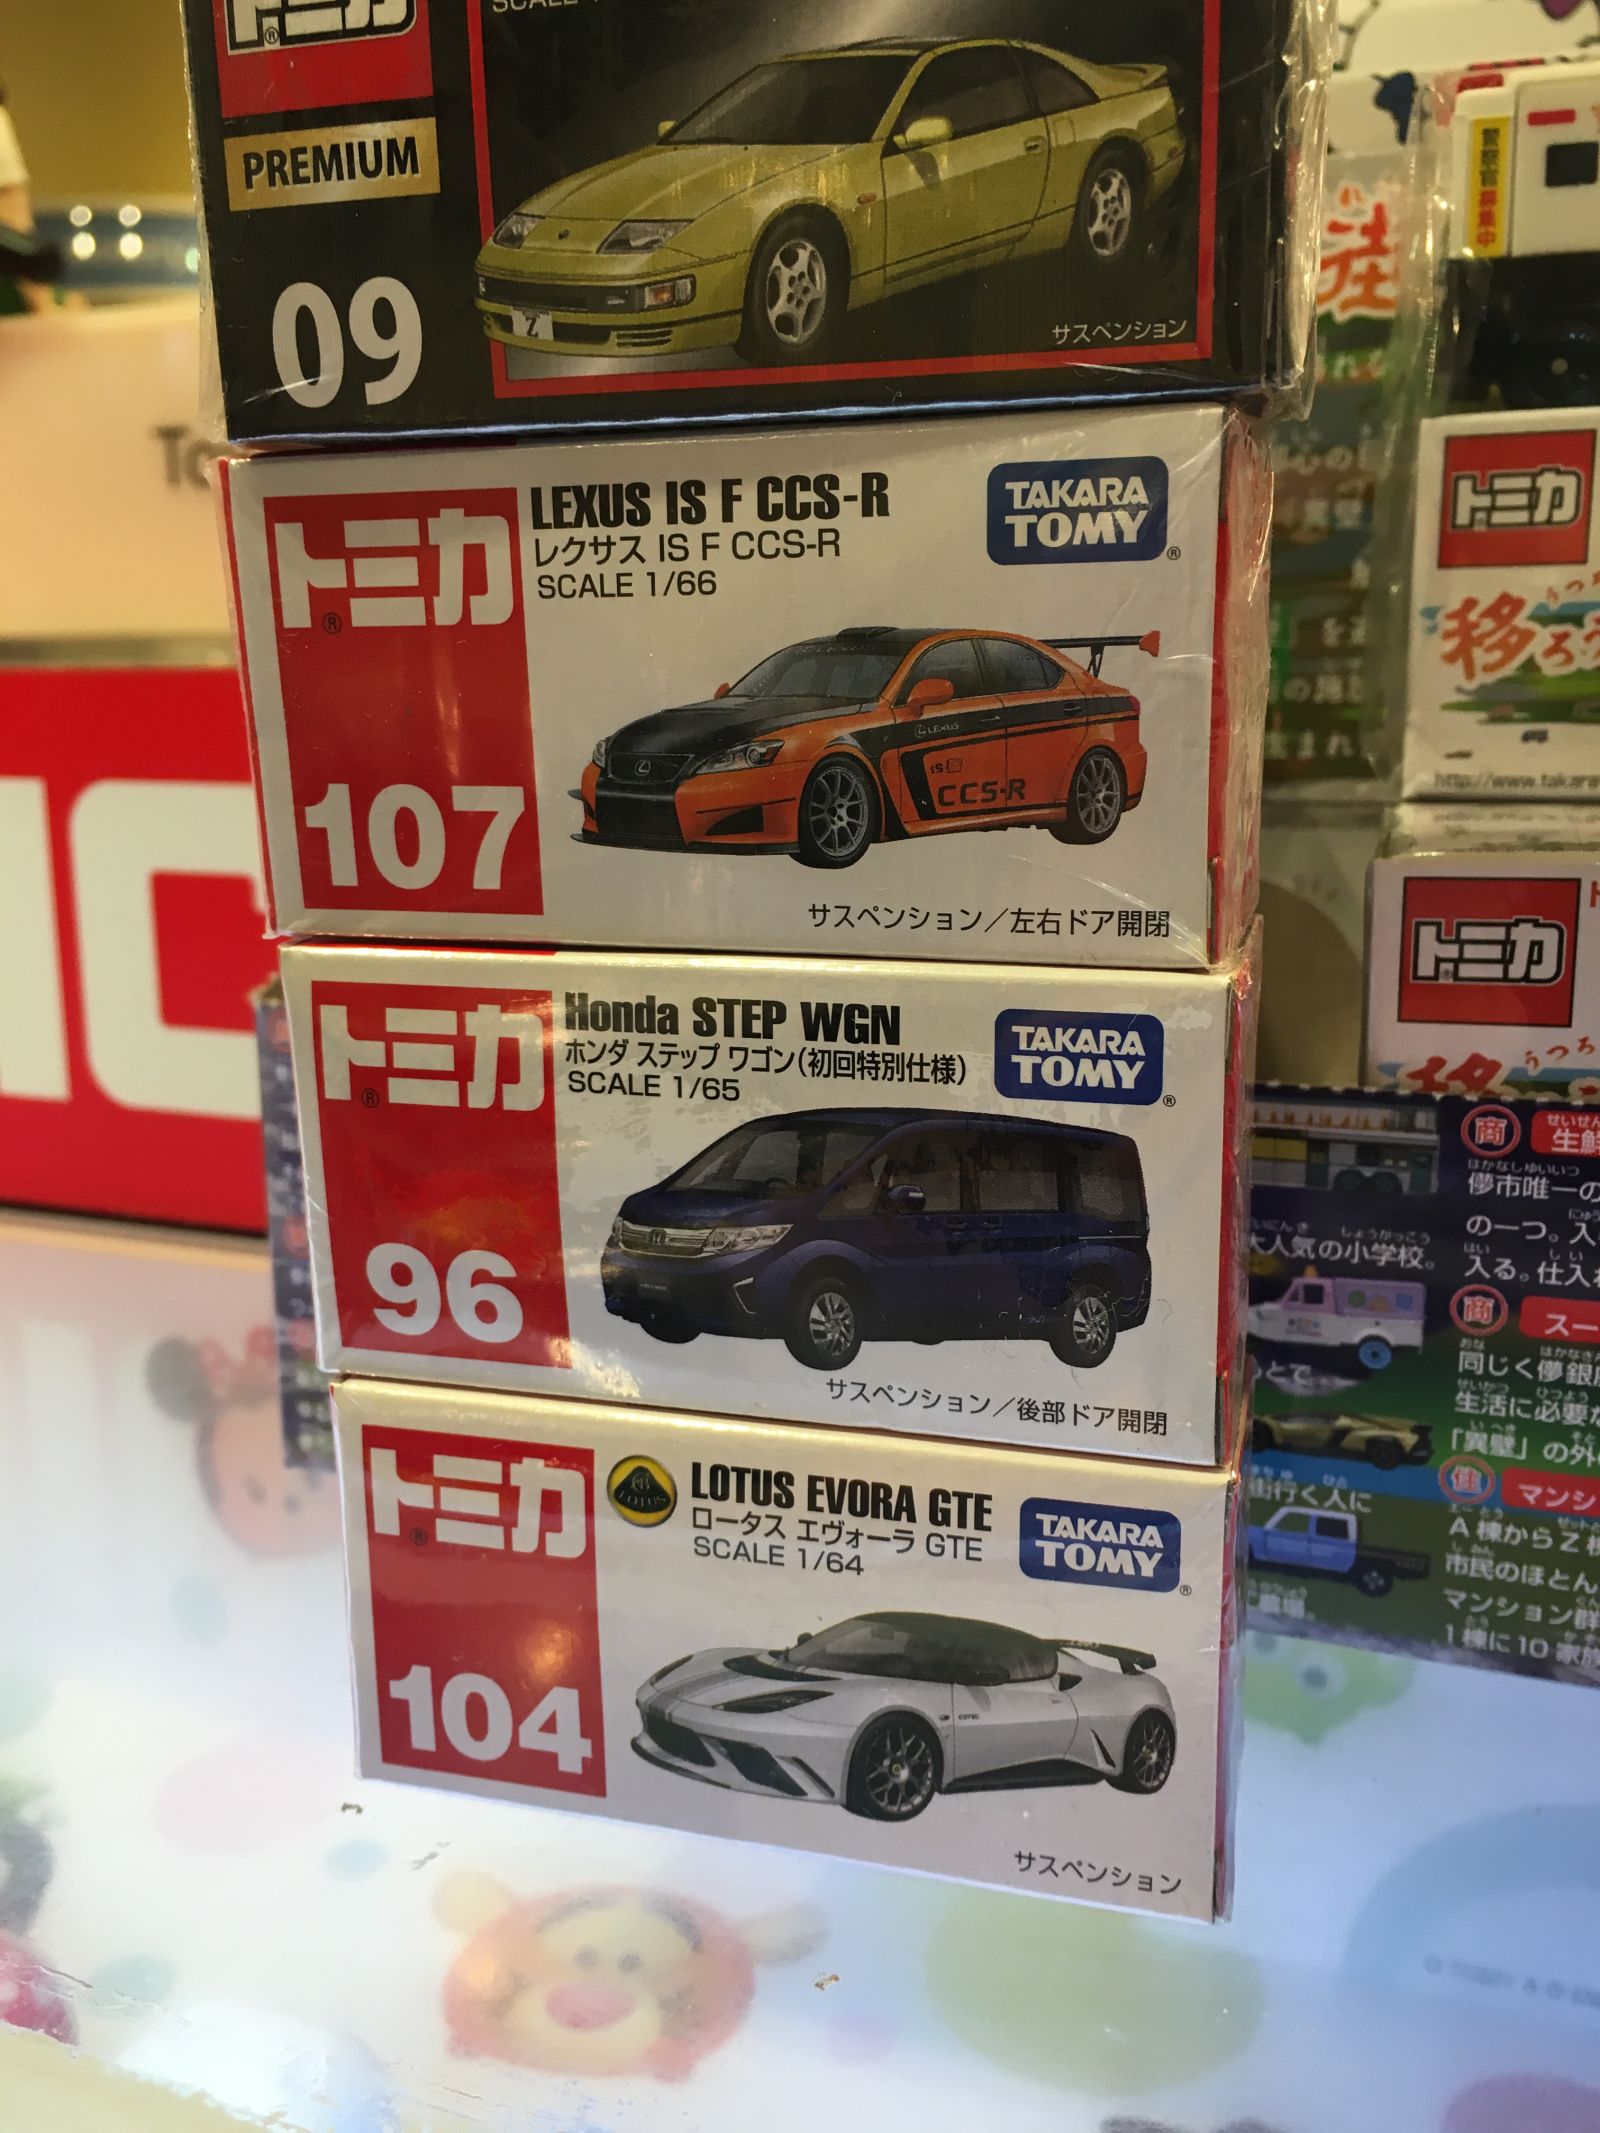 The Lotus and Lexus were must-haves that I’ve been eying for some time, the Stepwgn is my weakness (Japanese minivans), and the Datsun was a “Why not?” because it’s my first non-TLV Premium Tomica